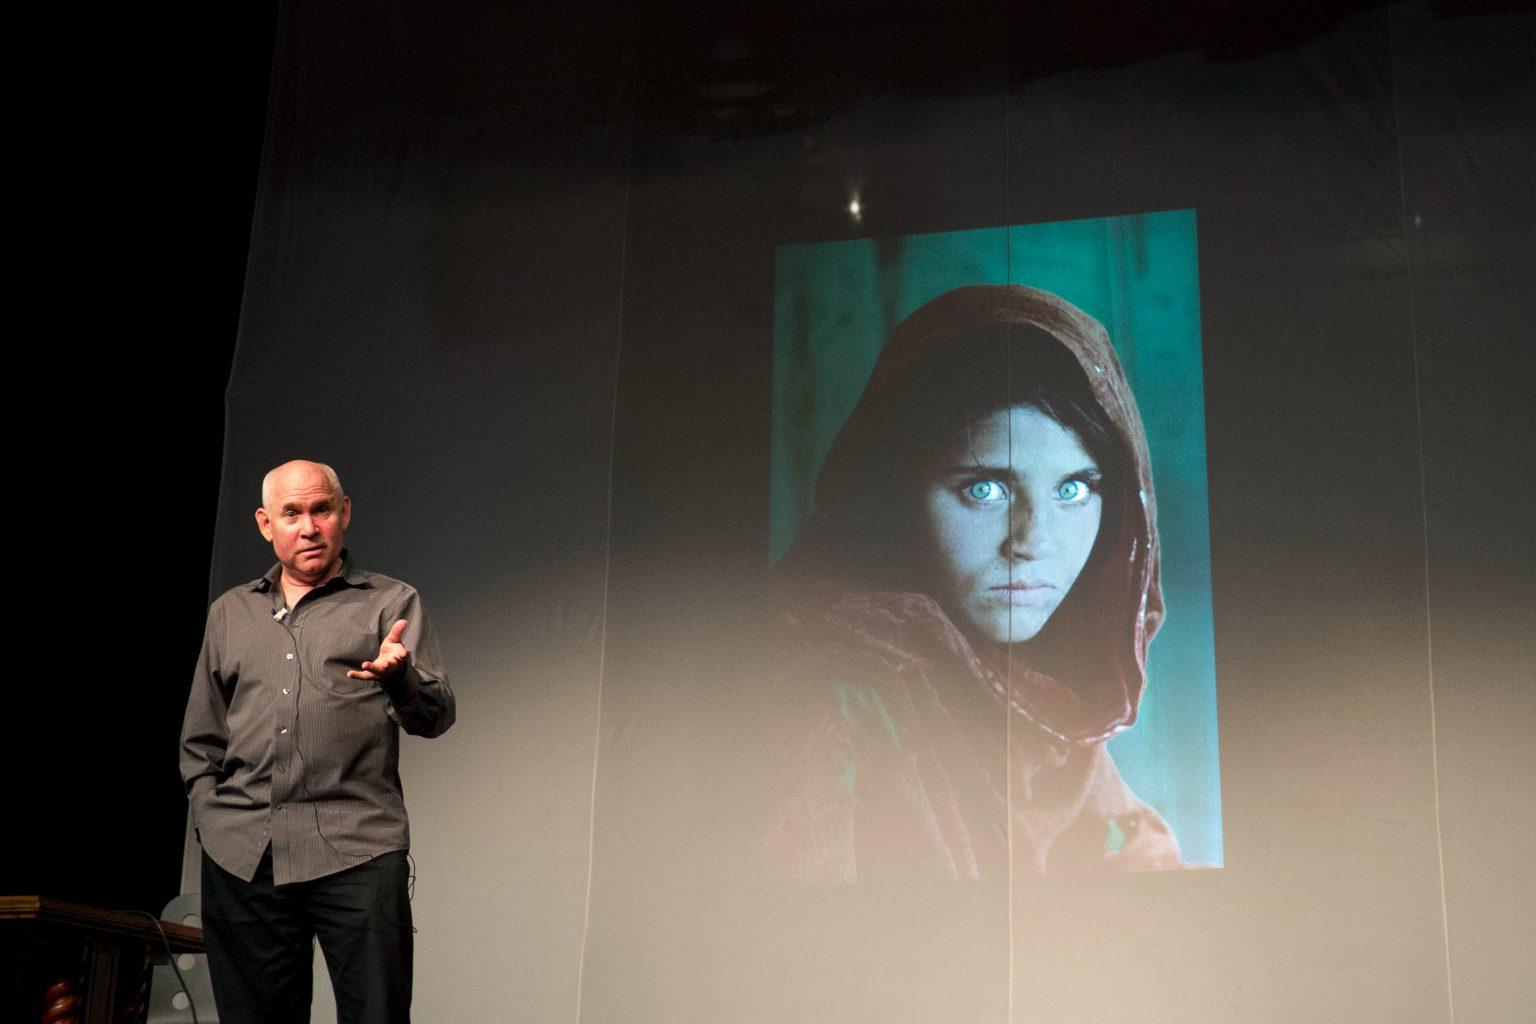 Steve McCurry giving a presentation on the very image in question.